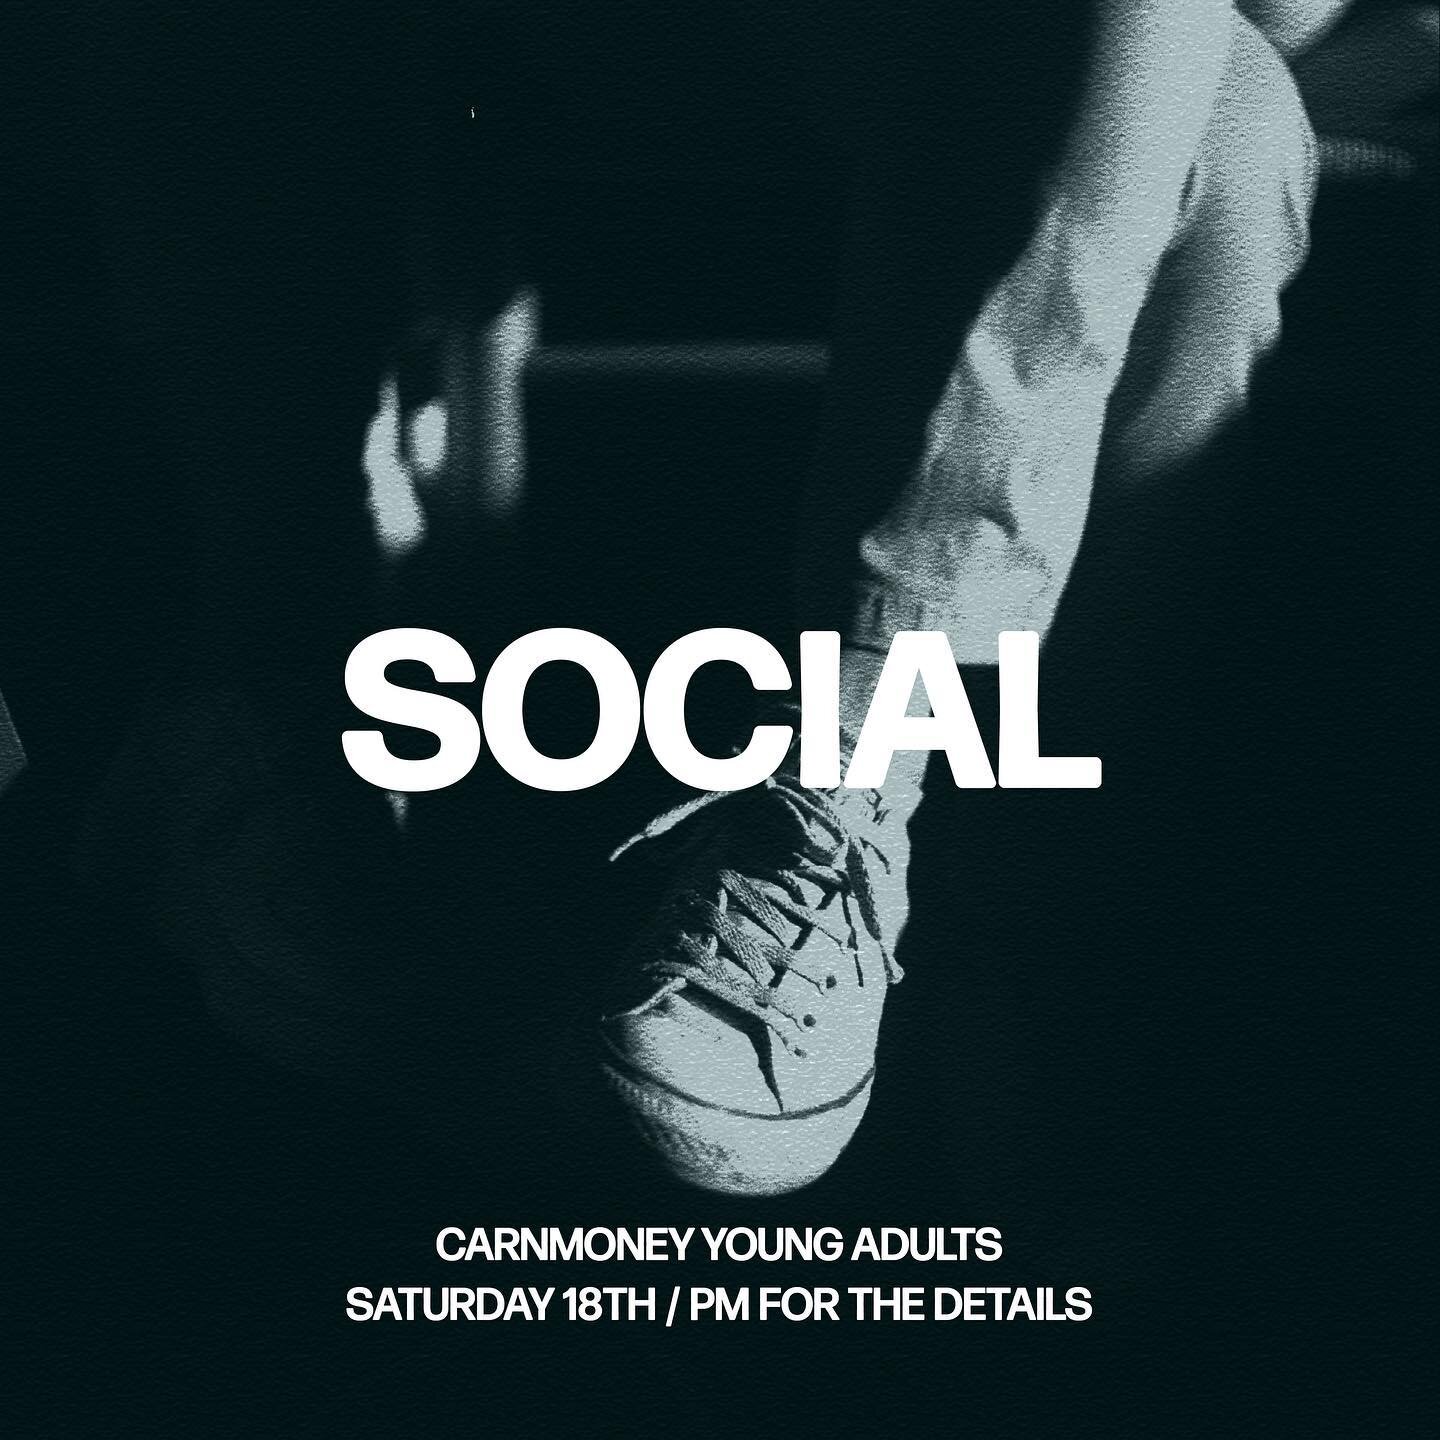 YOUNG ADULTS SOCIAL❕🏡

We are back THIS SATURDAY night! We can&rsquo;t wait and it&rsquo;s set to be a great night 😊

For ALL the details send us a private message 📩